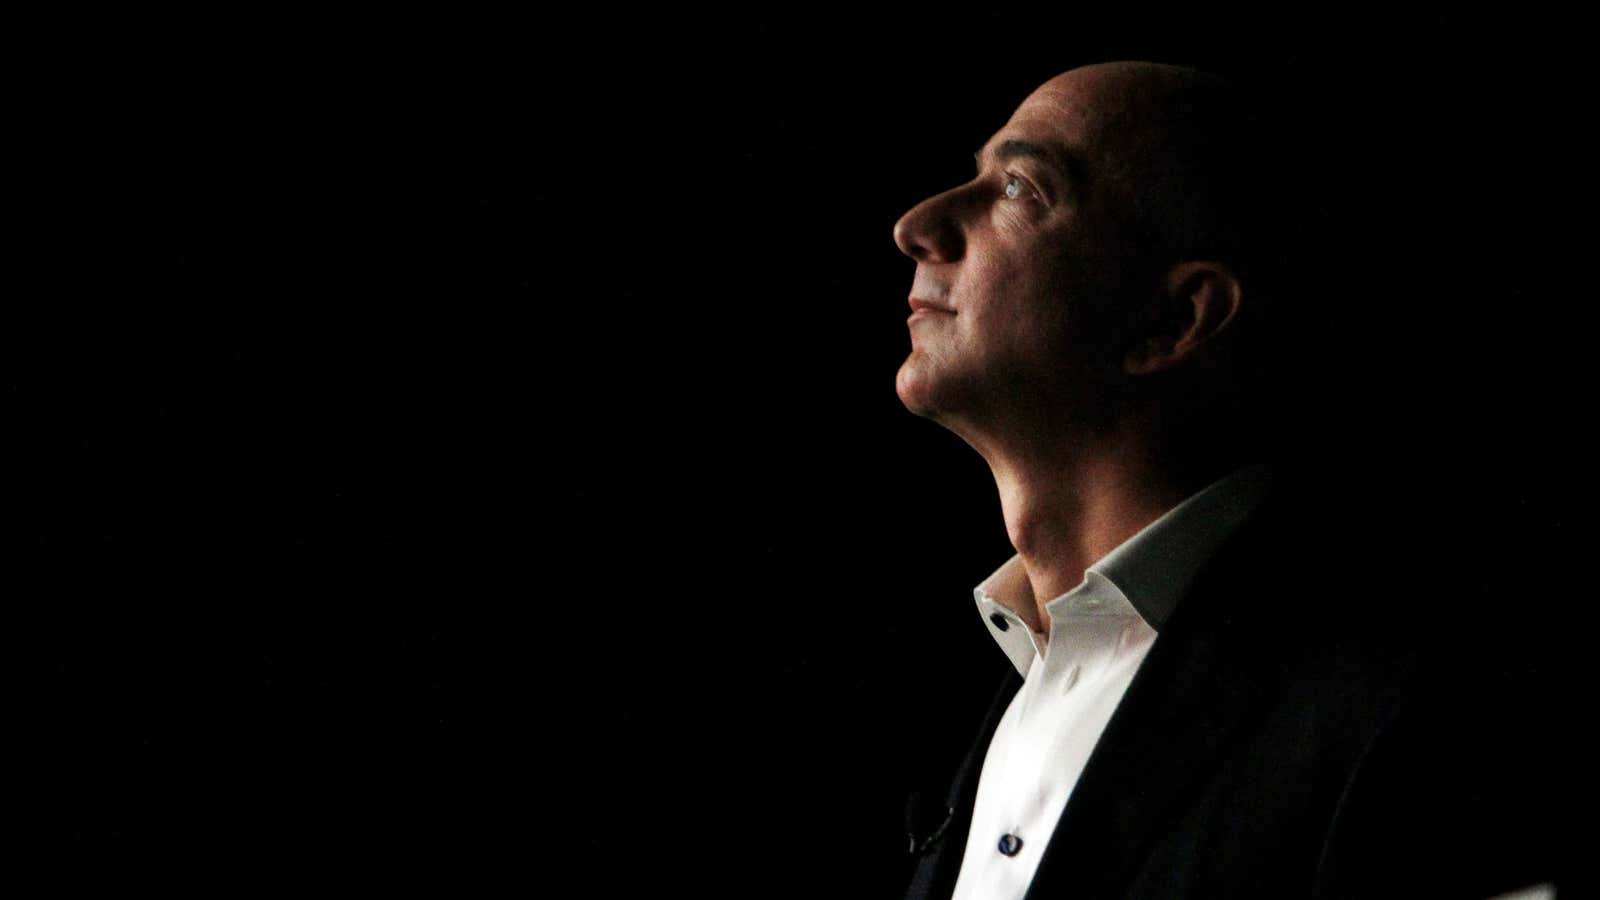 I’m Jeff Bezos, and you’re not.